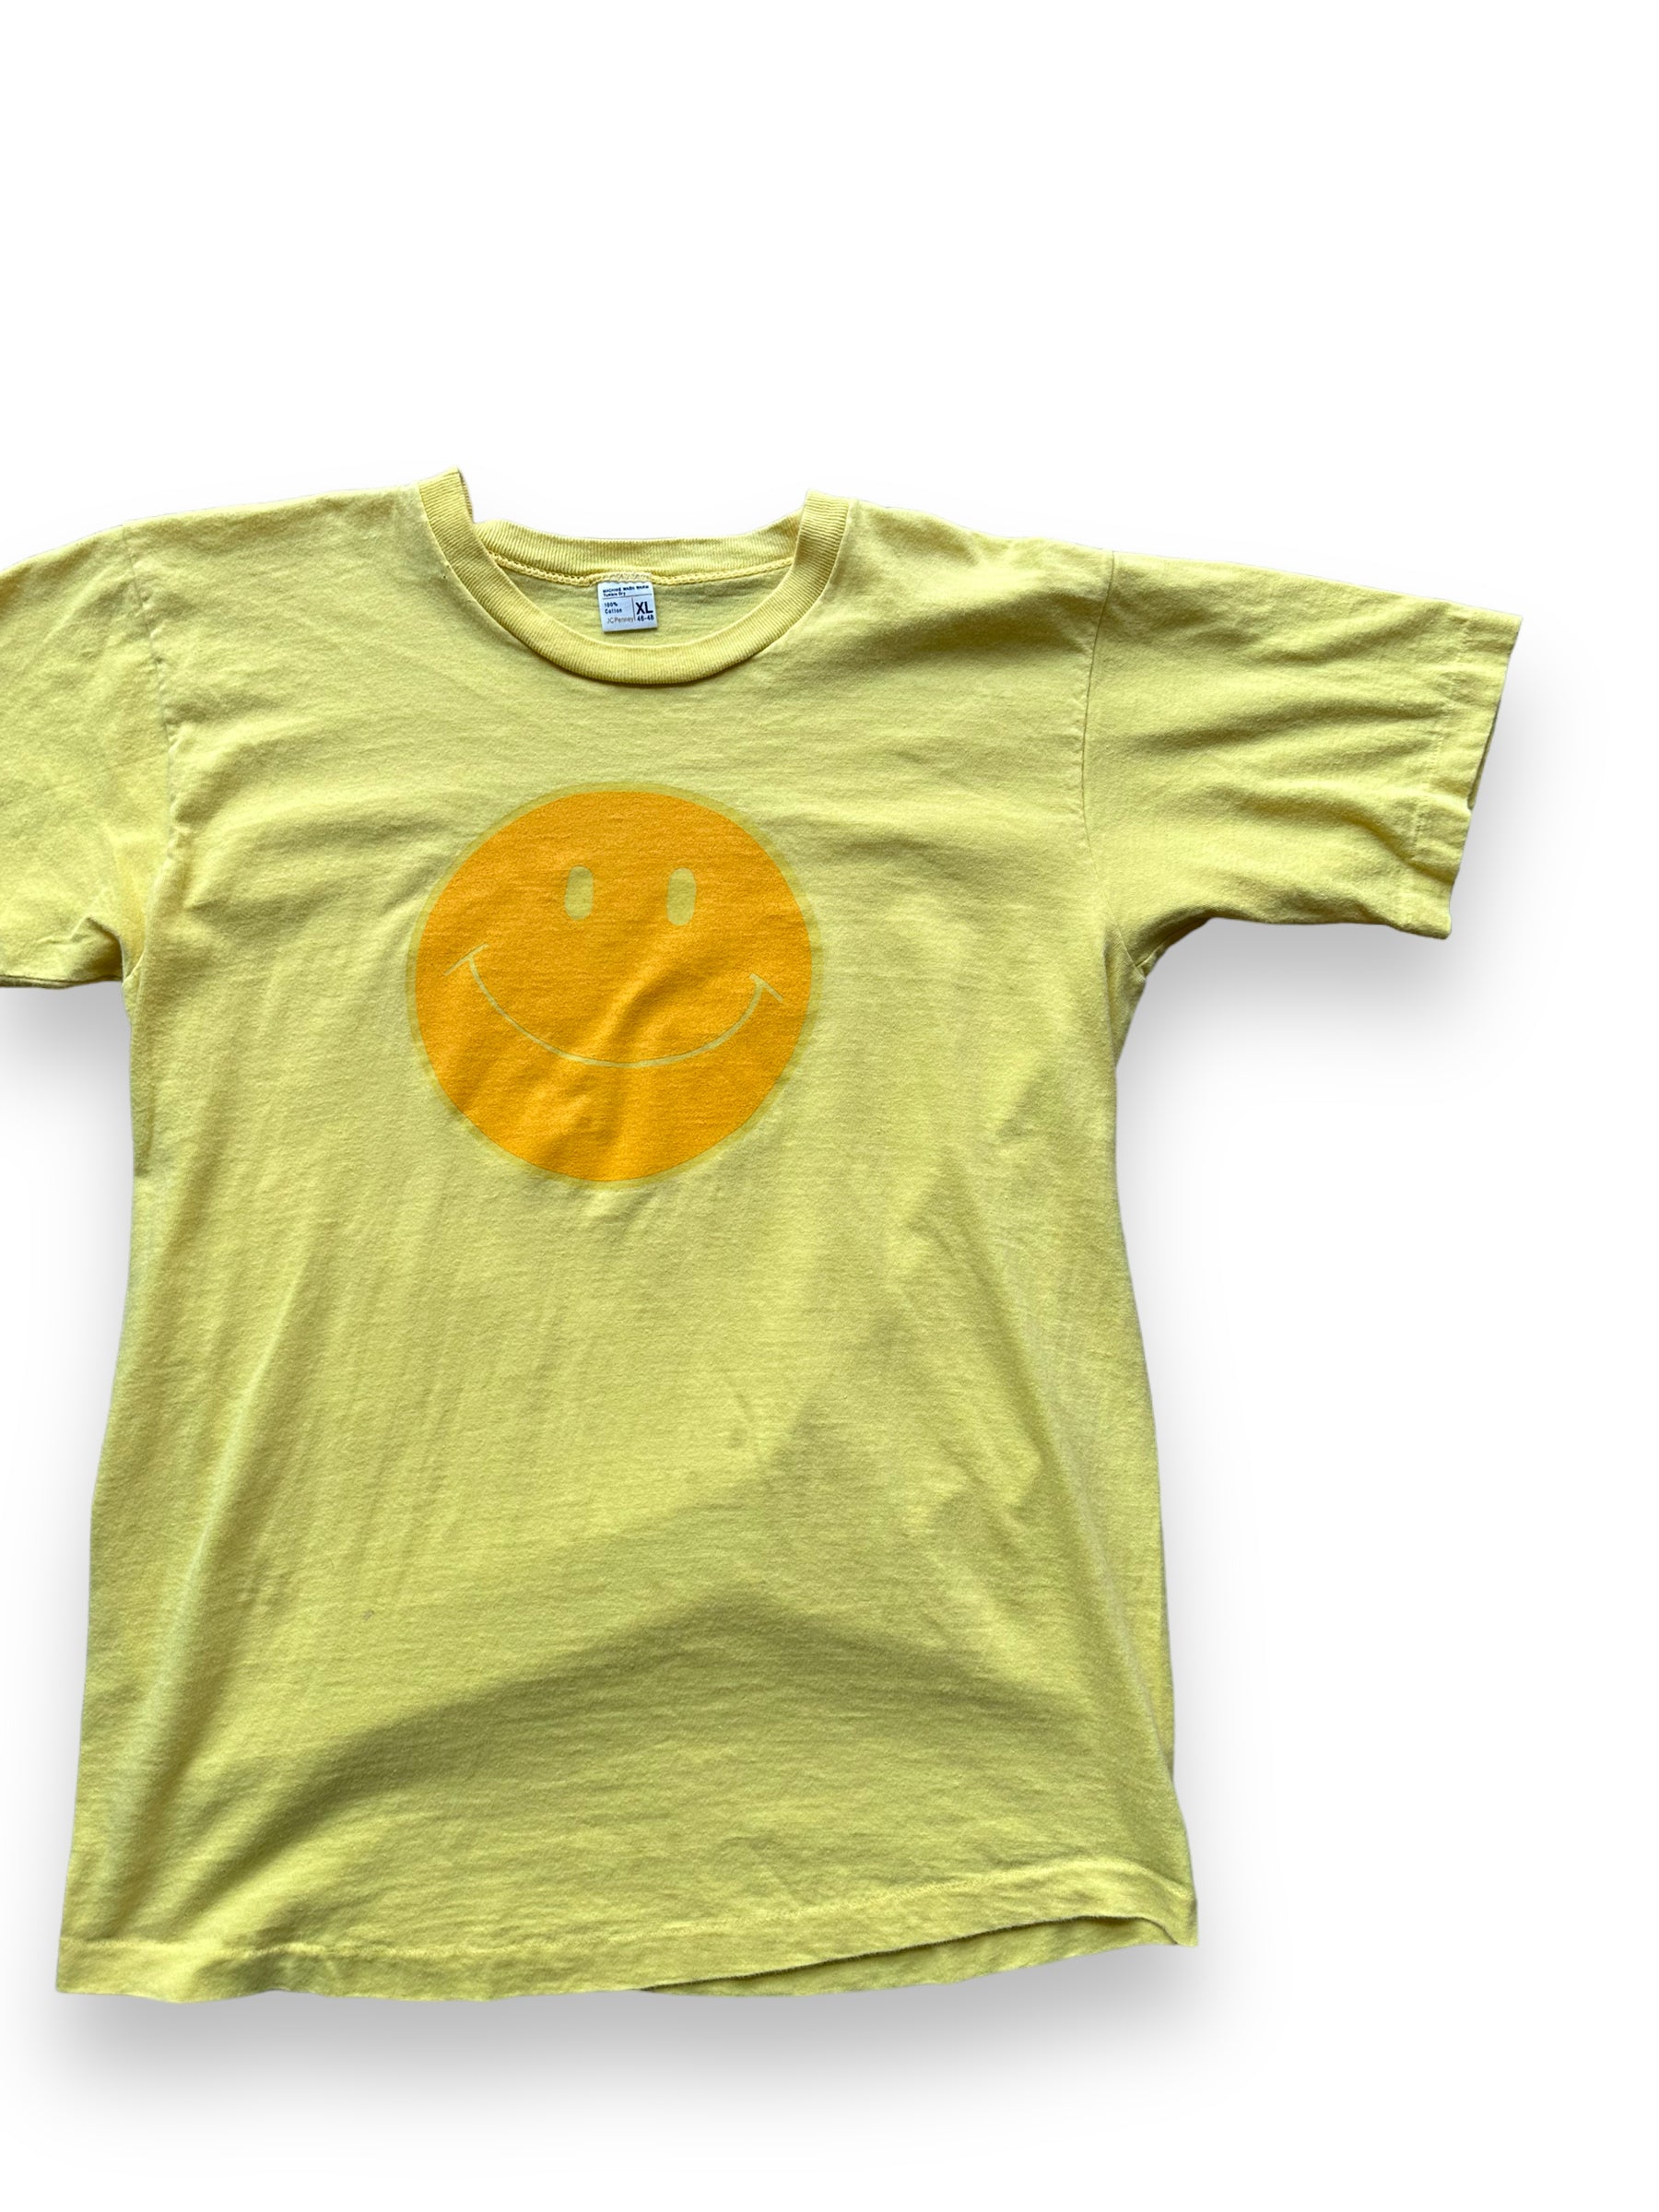 Front right of Vintage 70's Smiley Face Tee SZ XL |  Vintage Art Tee Seattle | Barn Owl Vintage